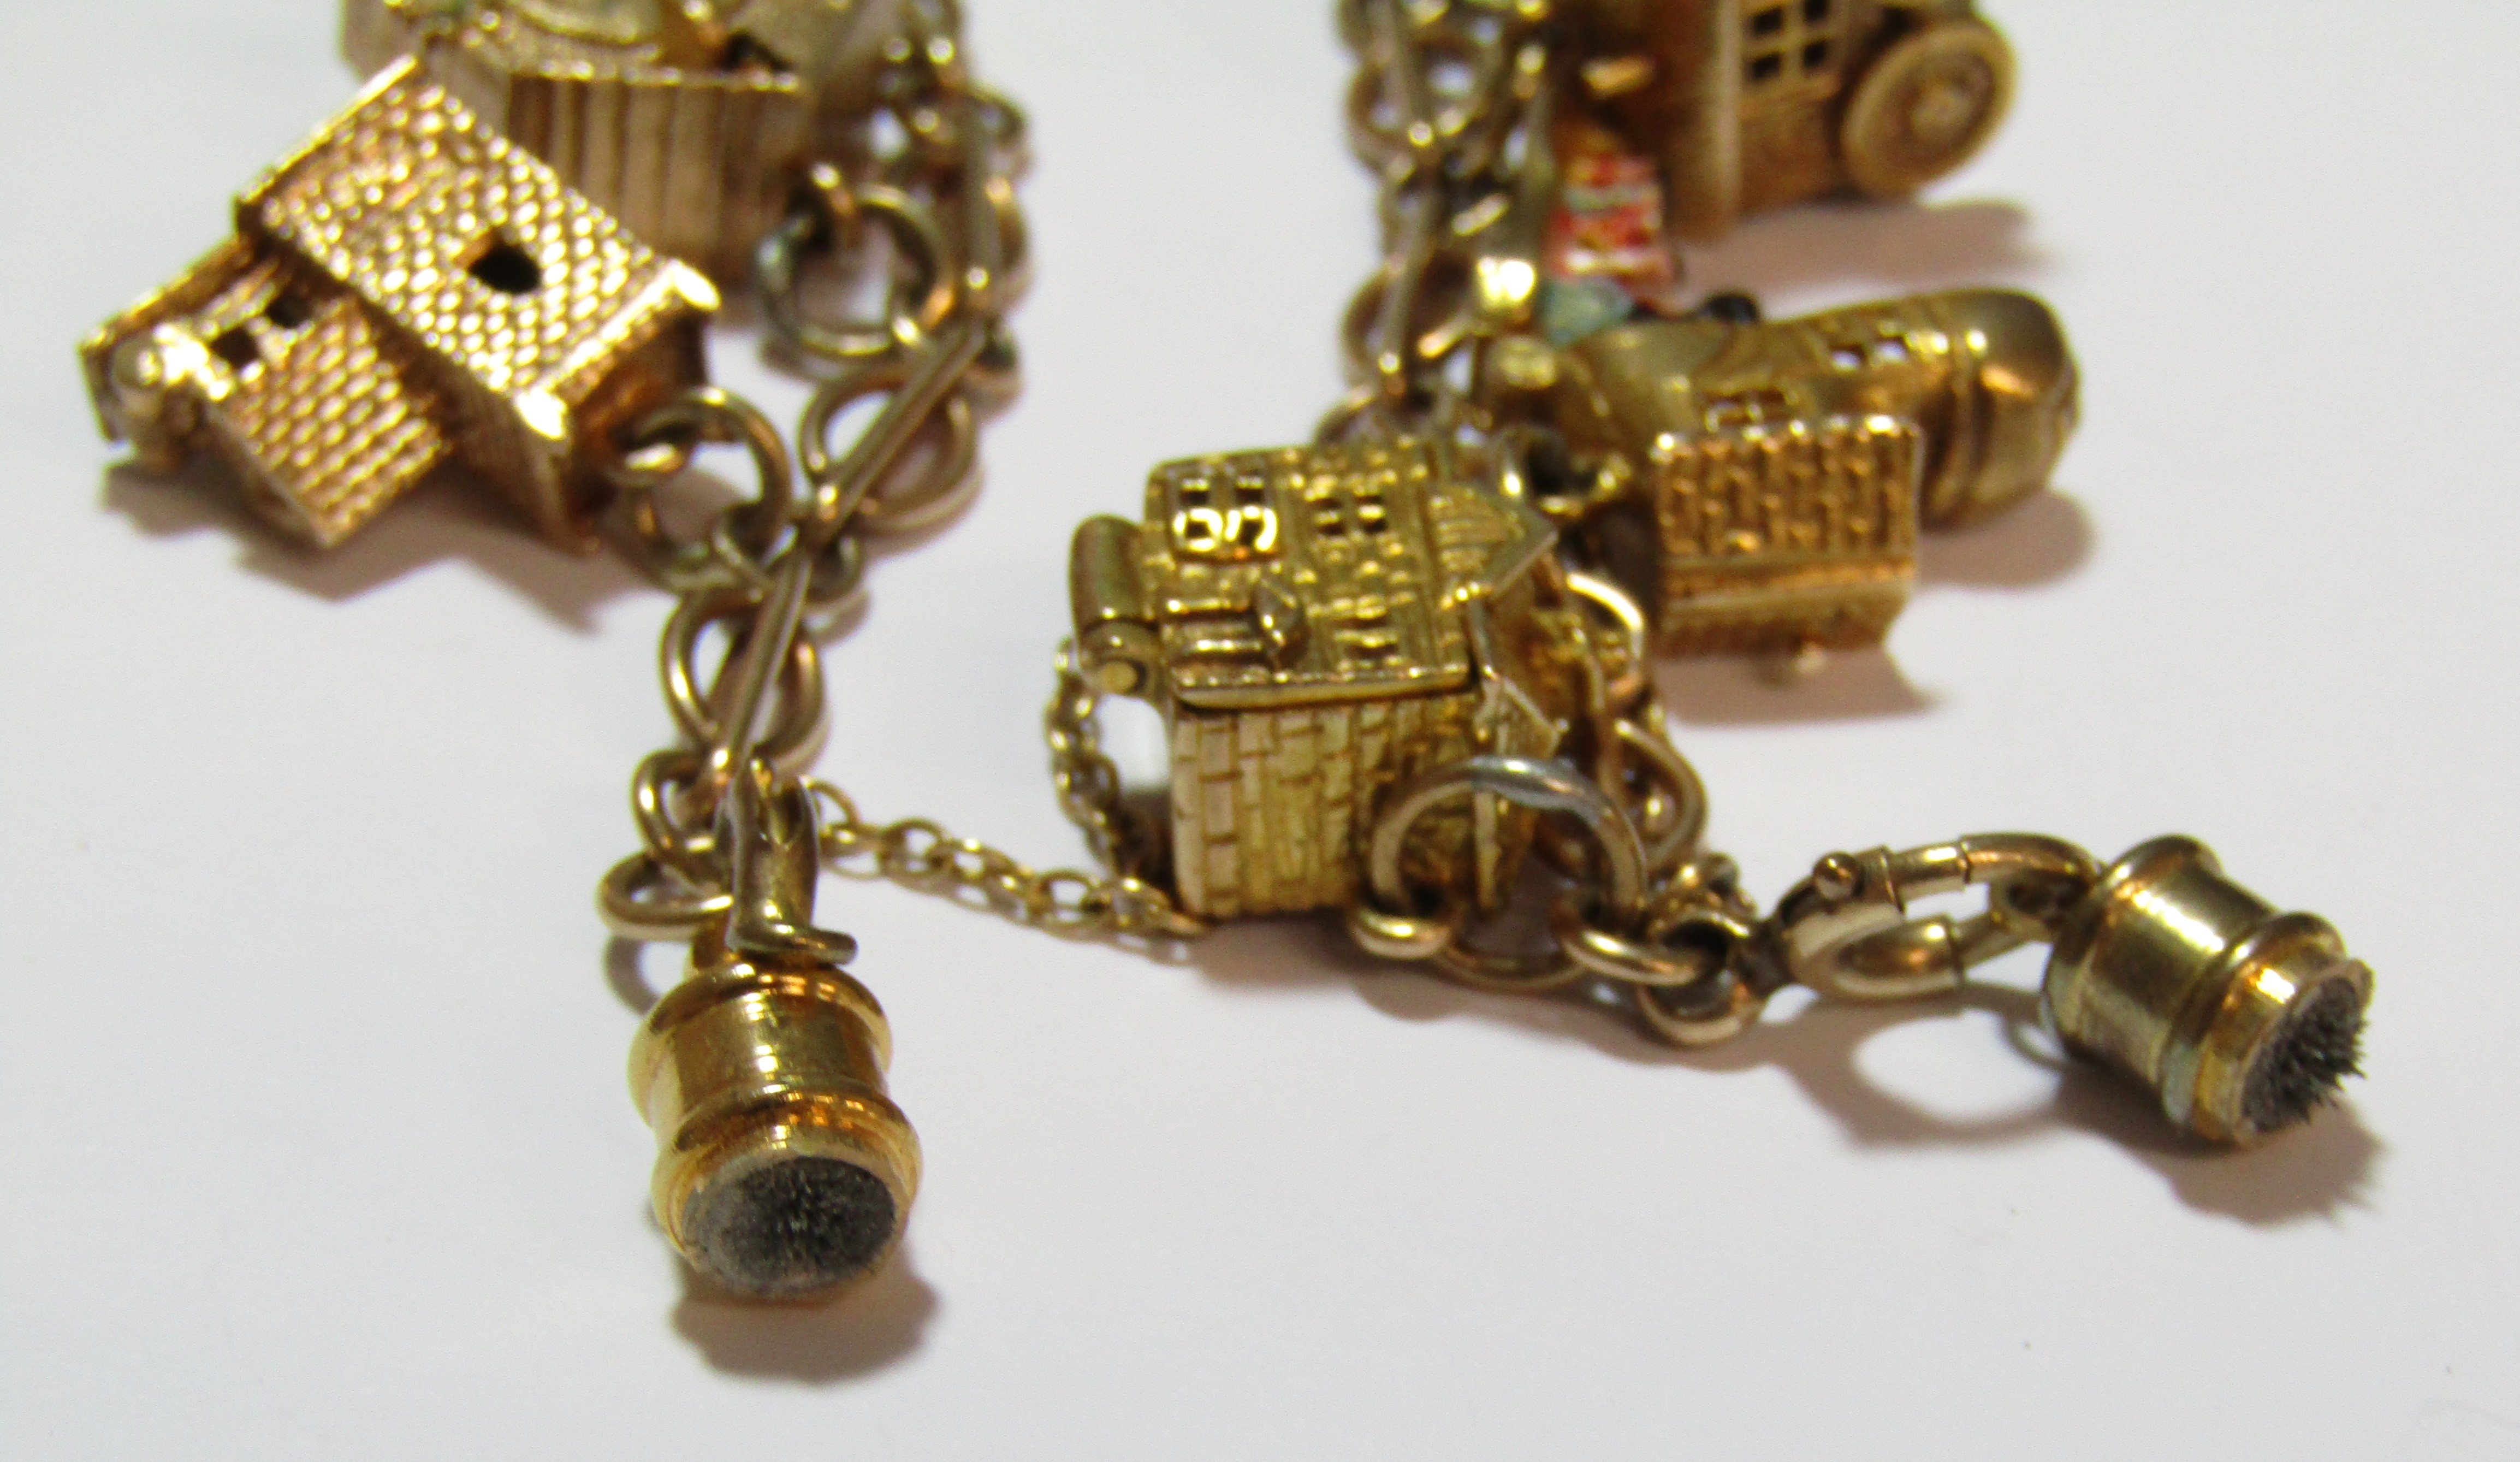 9ct gold charm bracelet - all charms appear hallmarked apart from 'Old Mother Hubbards Boot', - Image 8 of 8